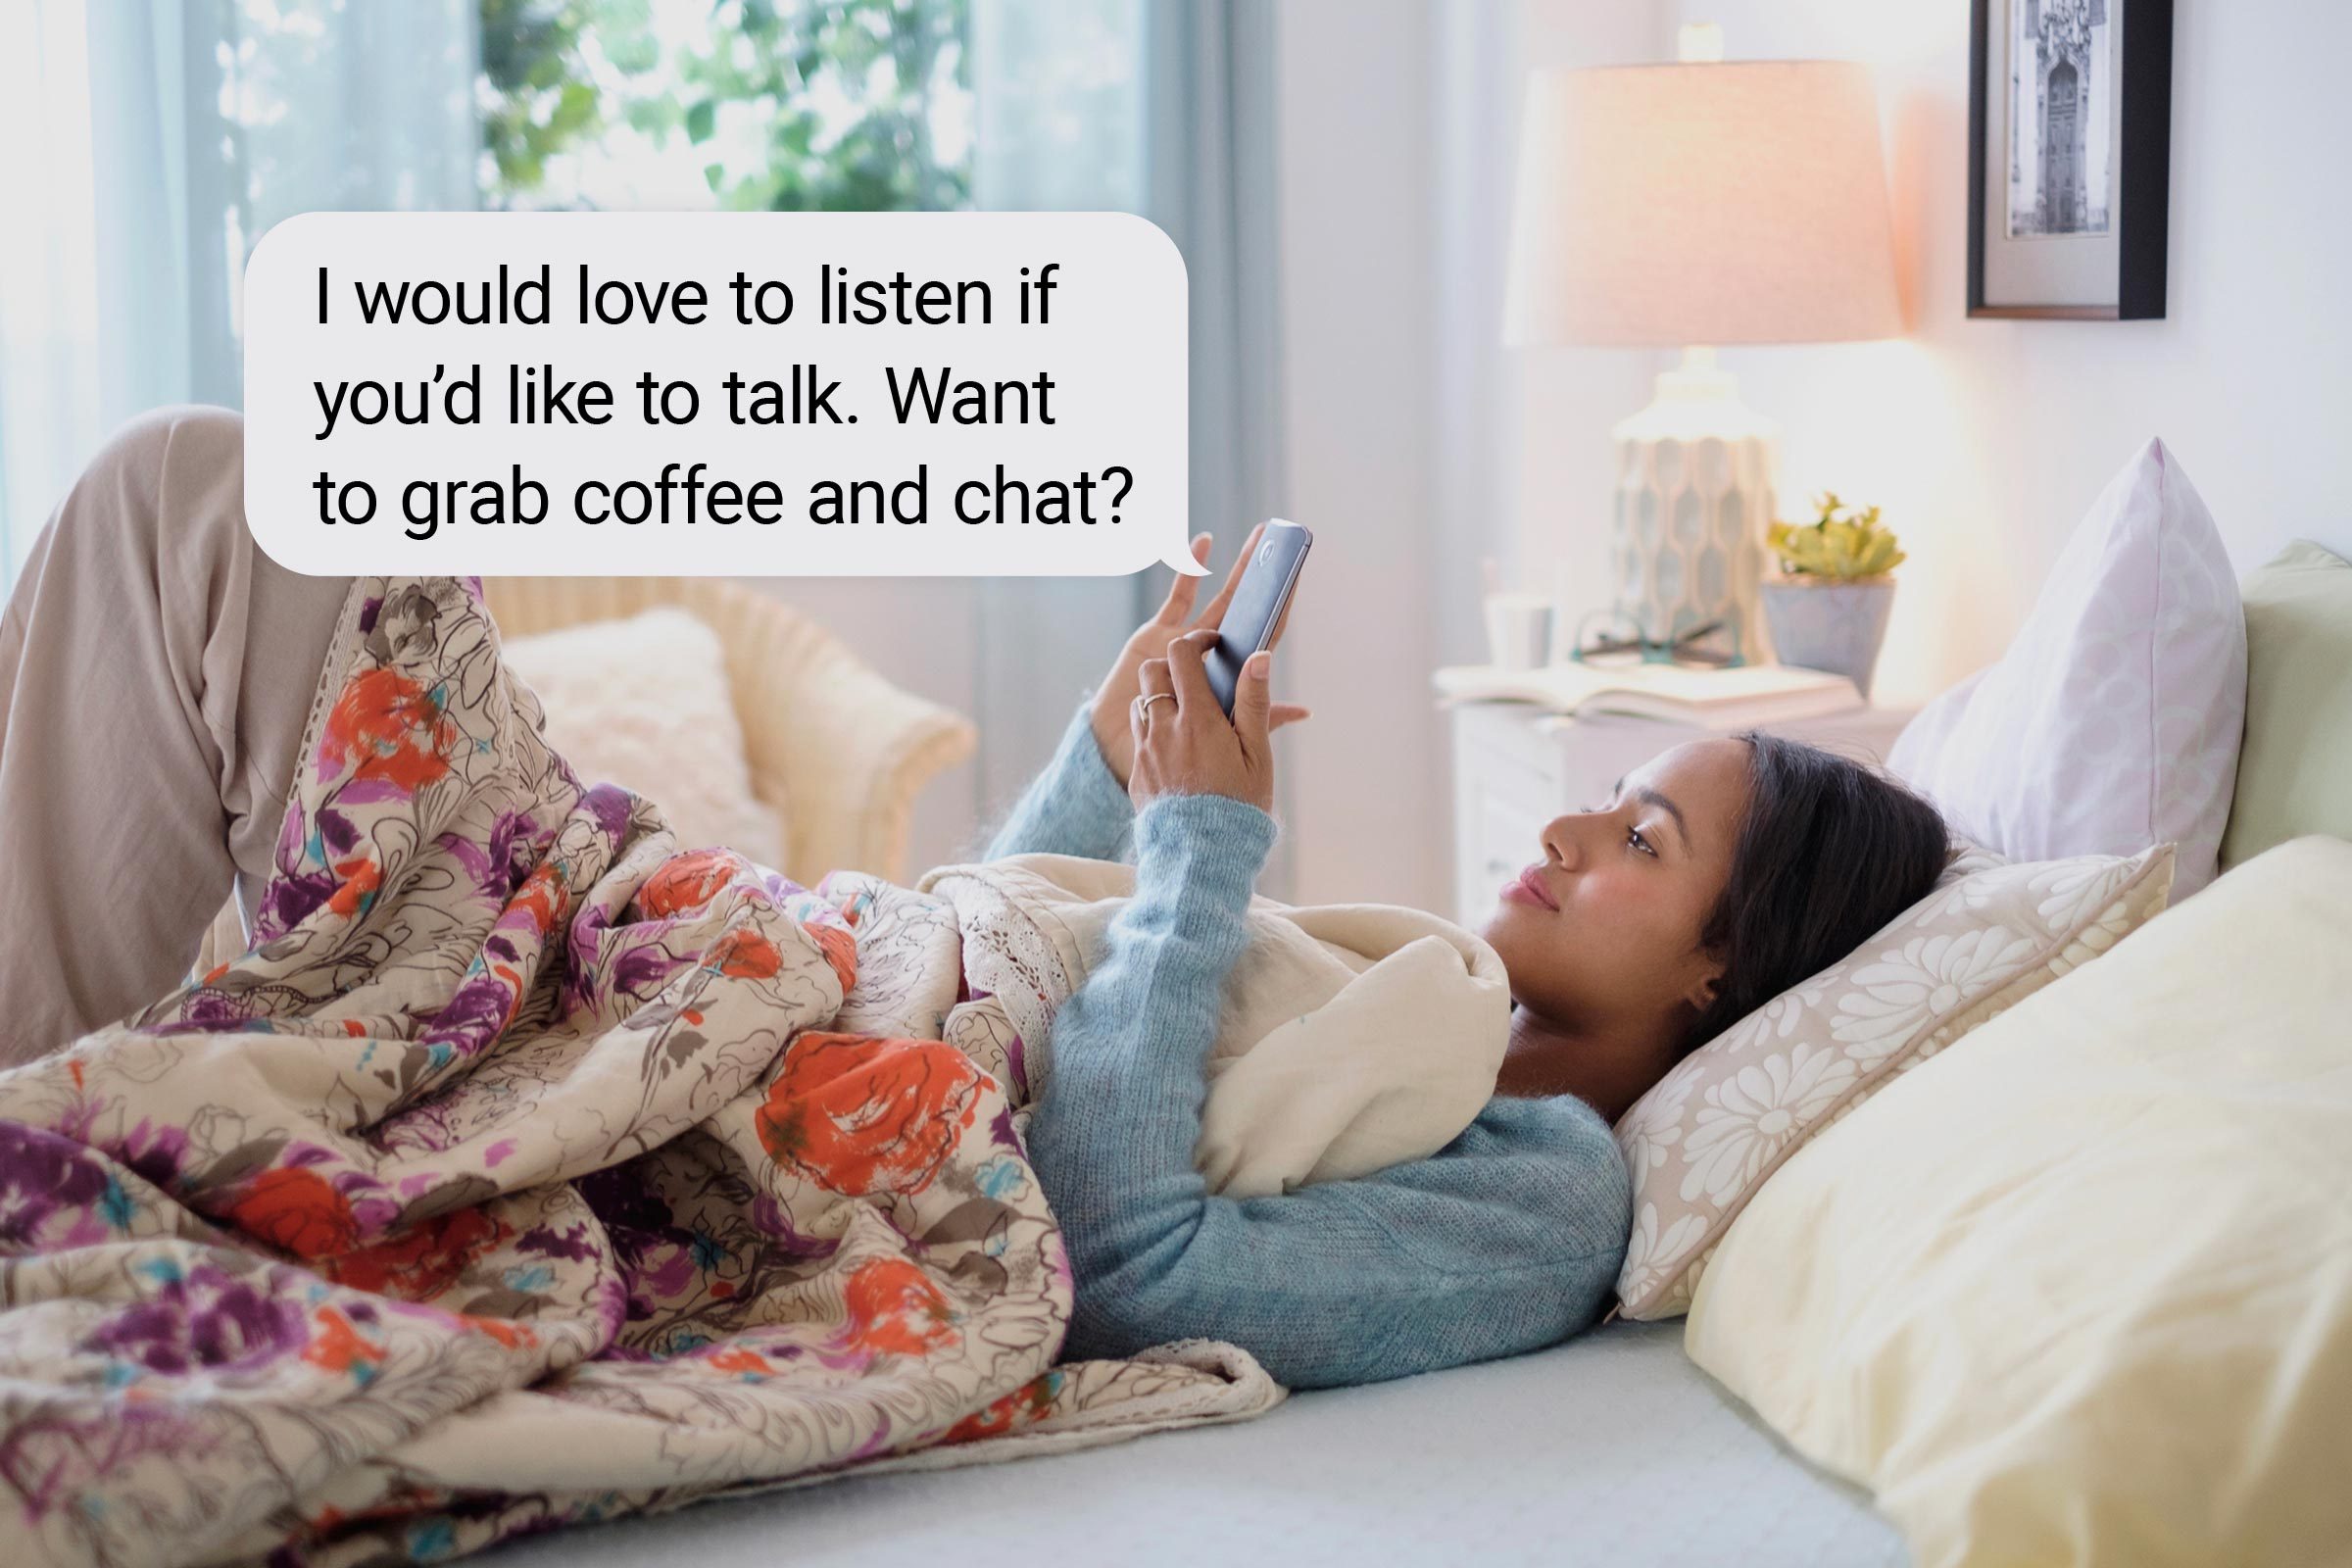 Speech bubble text: "I would love to listen if you'd like to talk. Want to grab coffee and chat?"